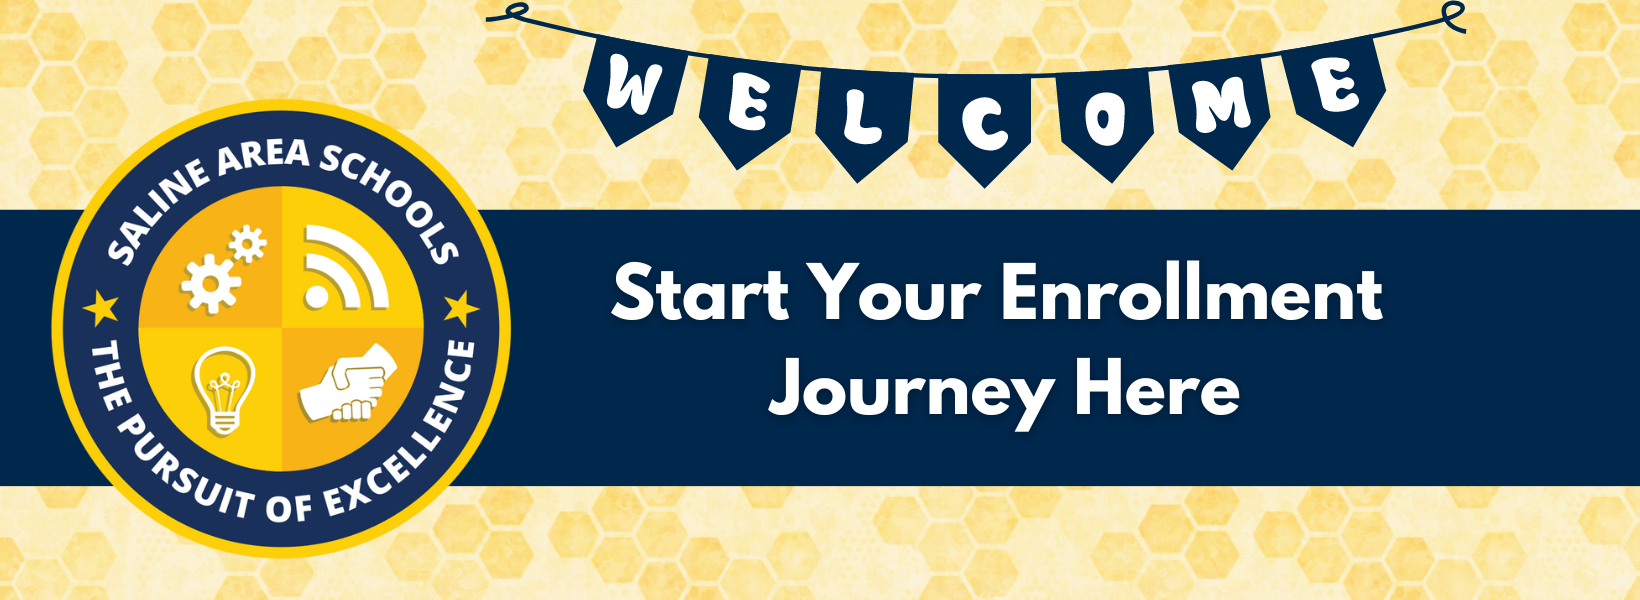 Welcome Start Your Enrollment Journey Here